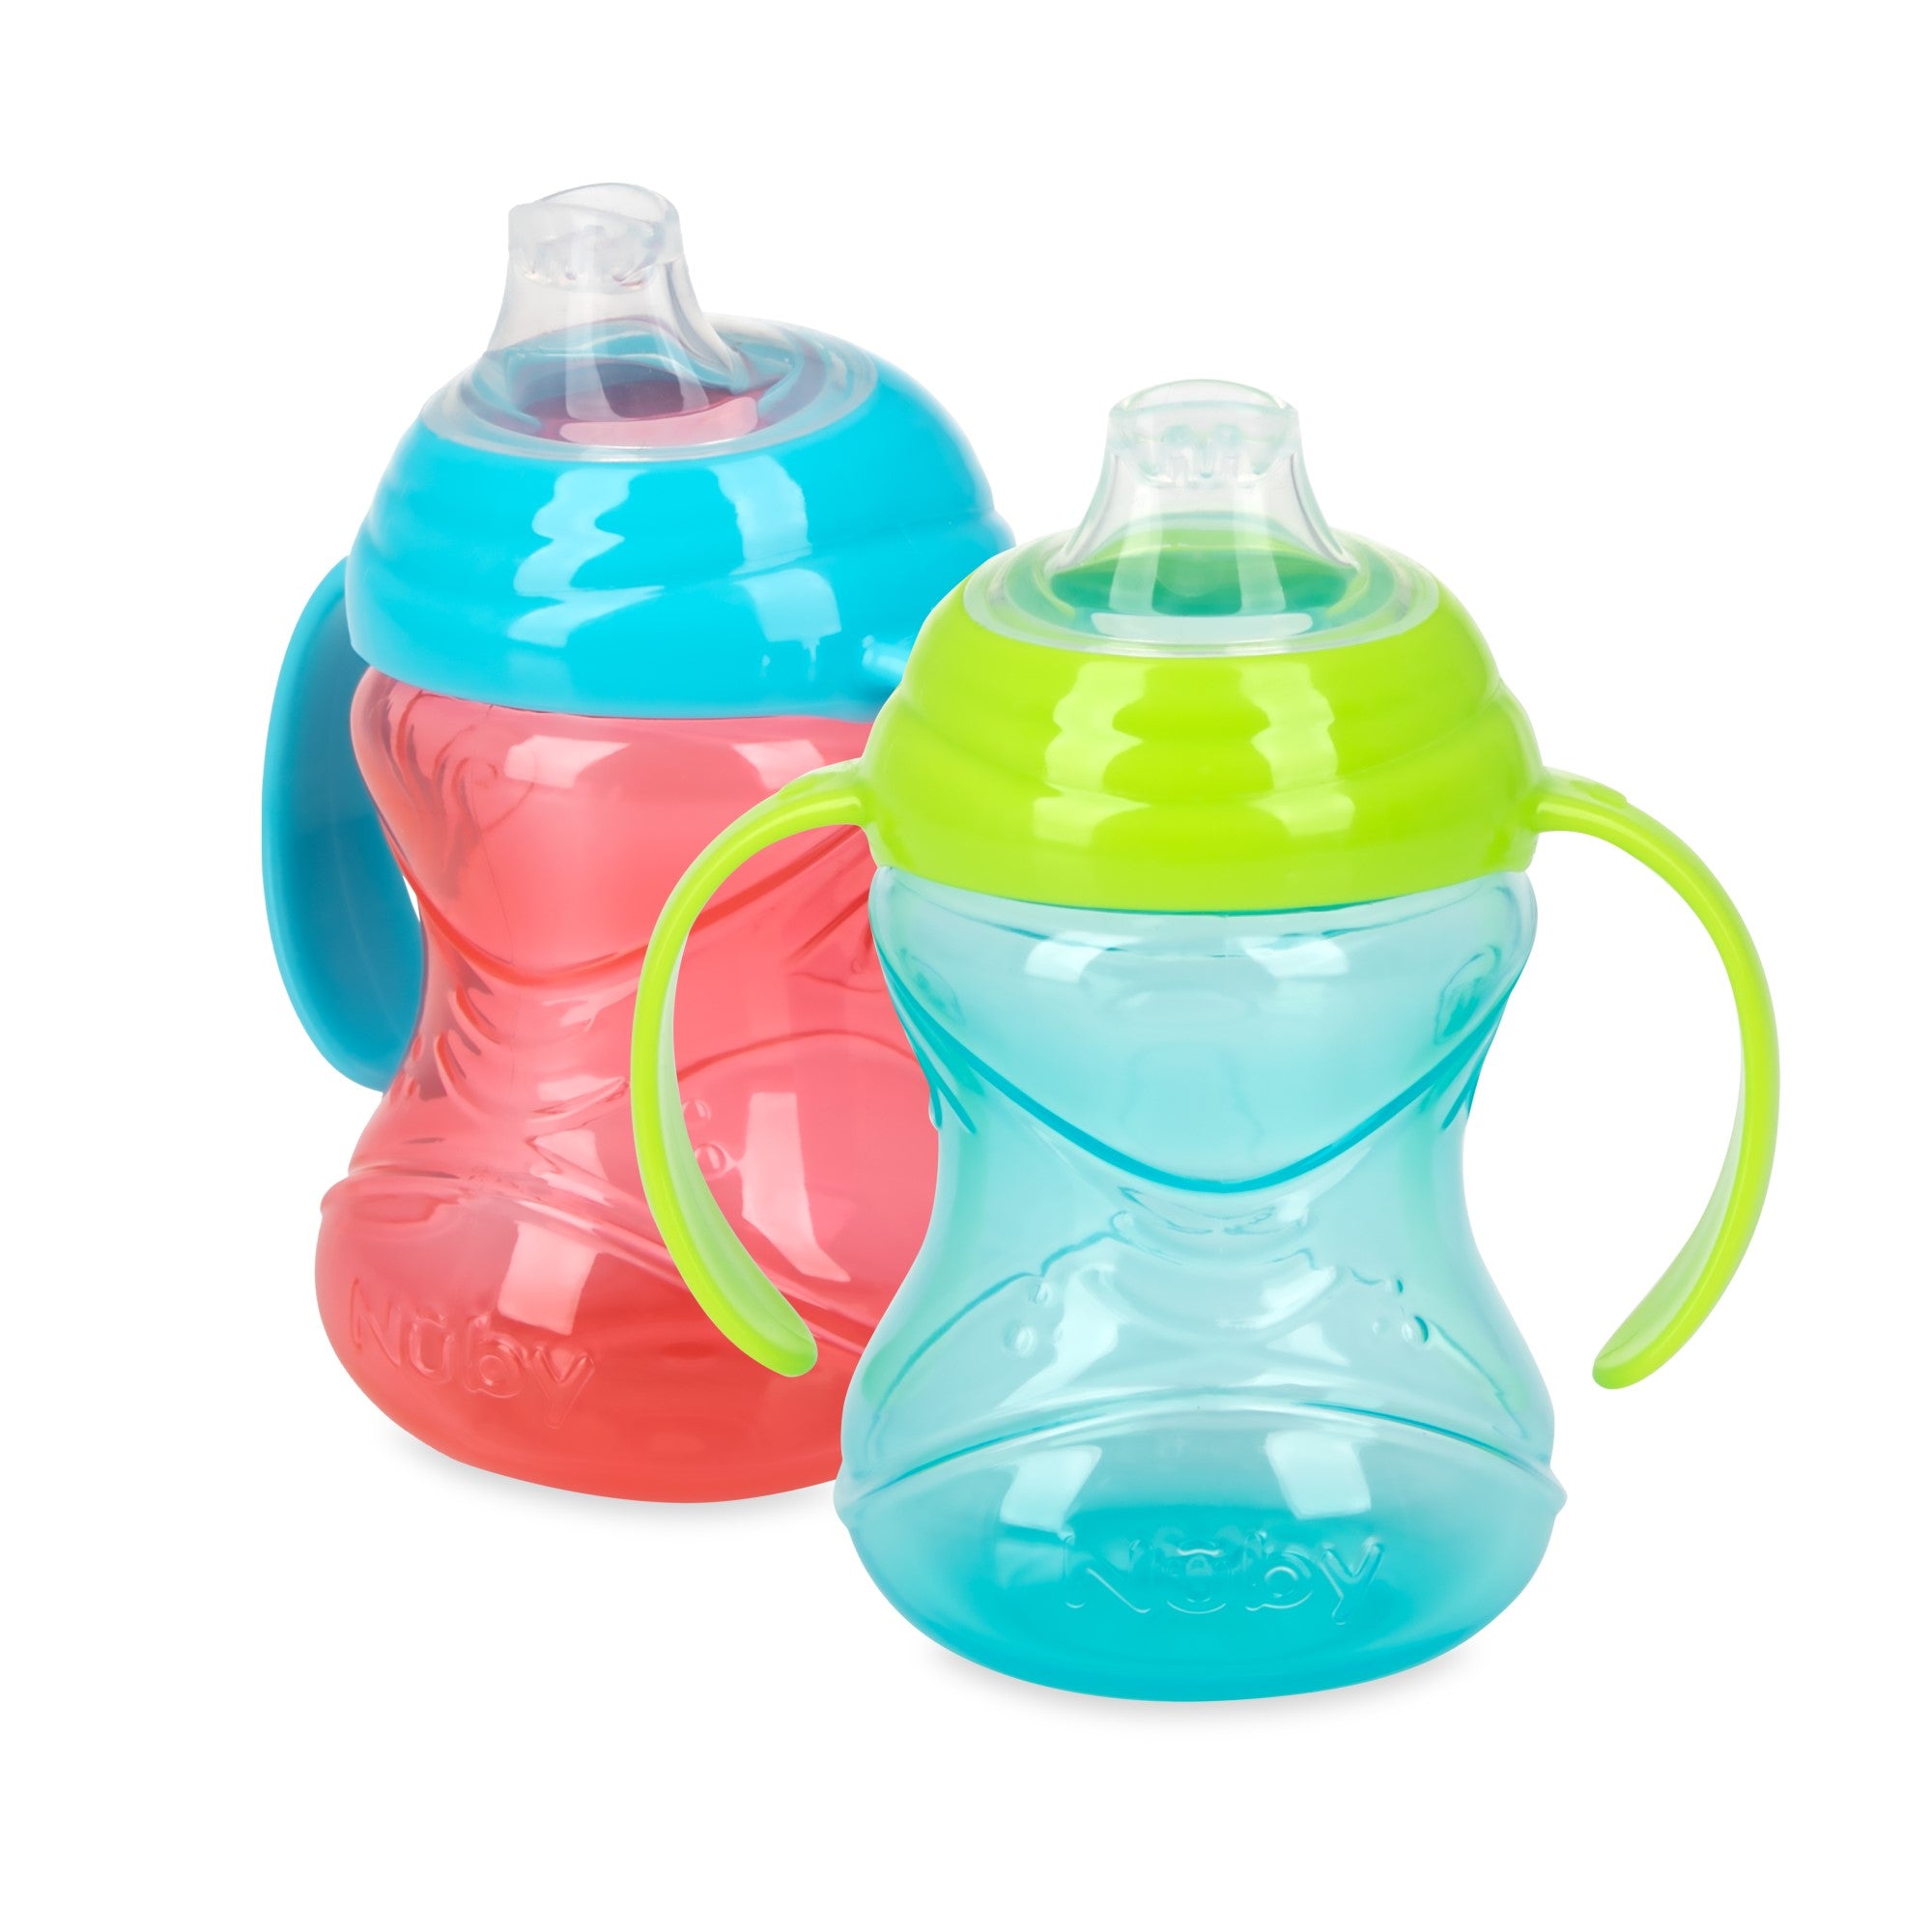 Re-Play Made in The USA 3pk No Spill Sippy Cups for Baby, Toddler, and Child Feeding - Aqua, Sky Blue, Yellow (Surf)